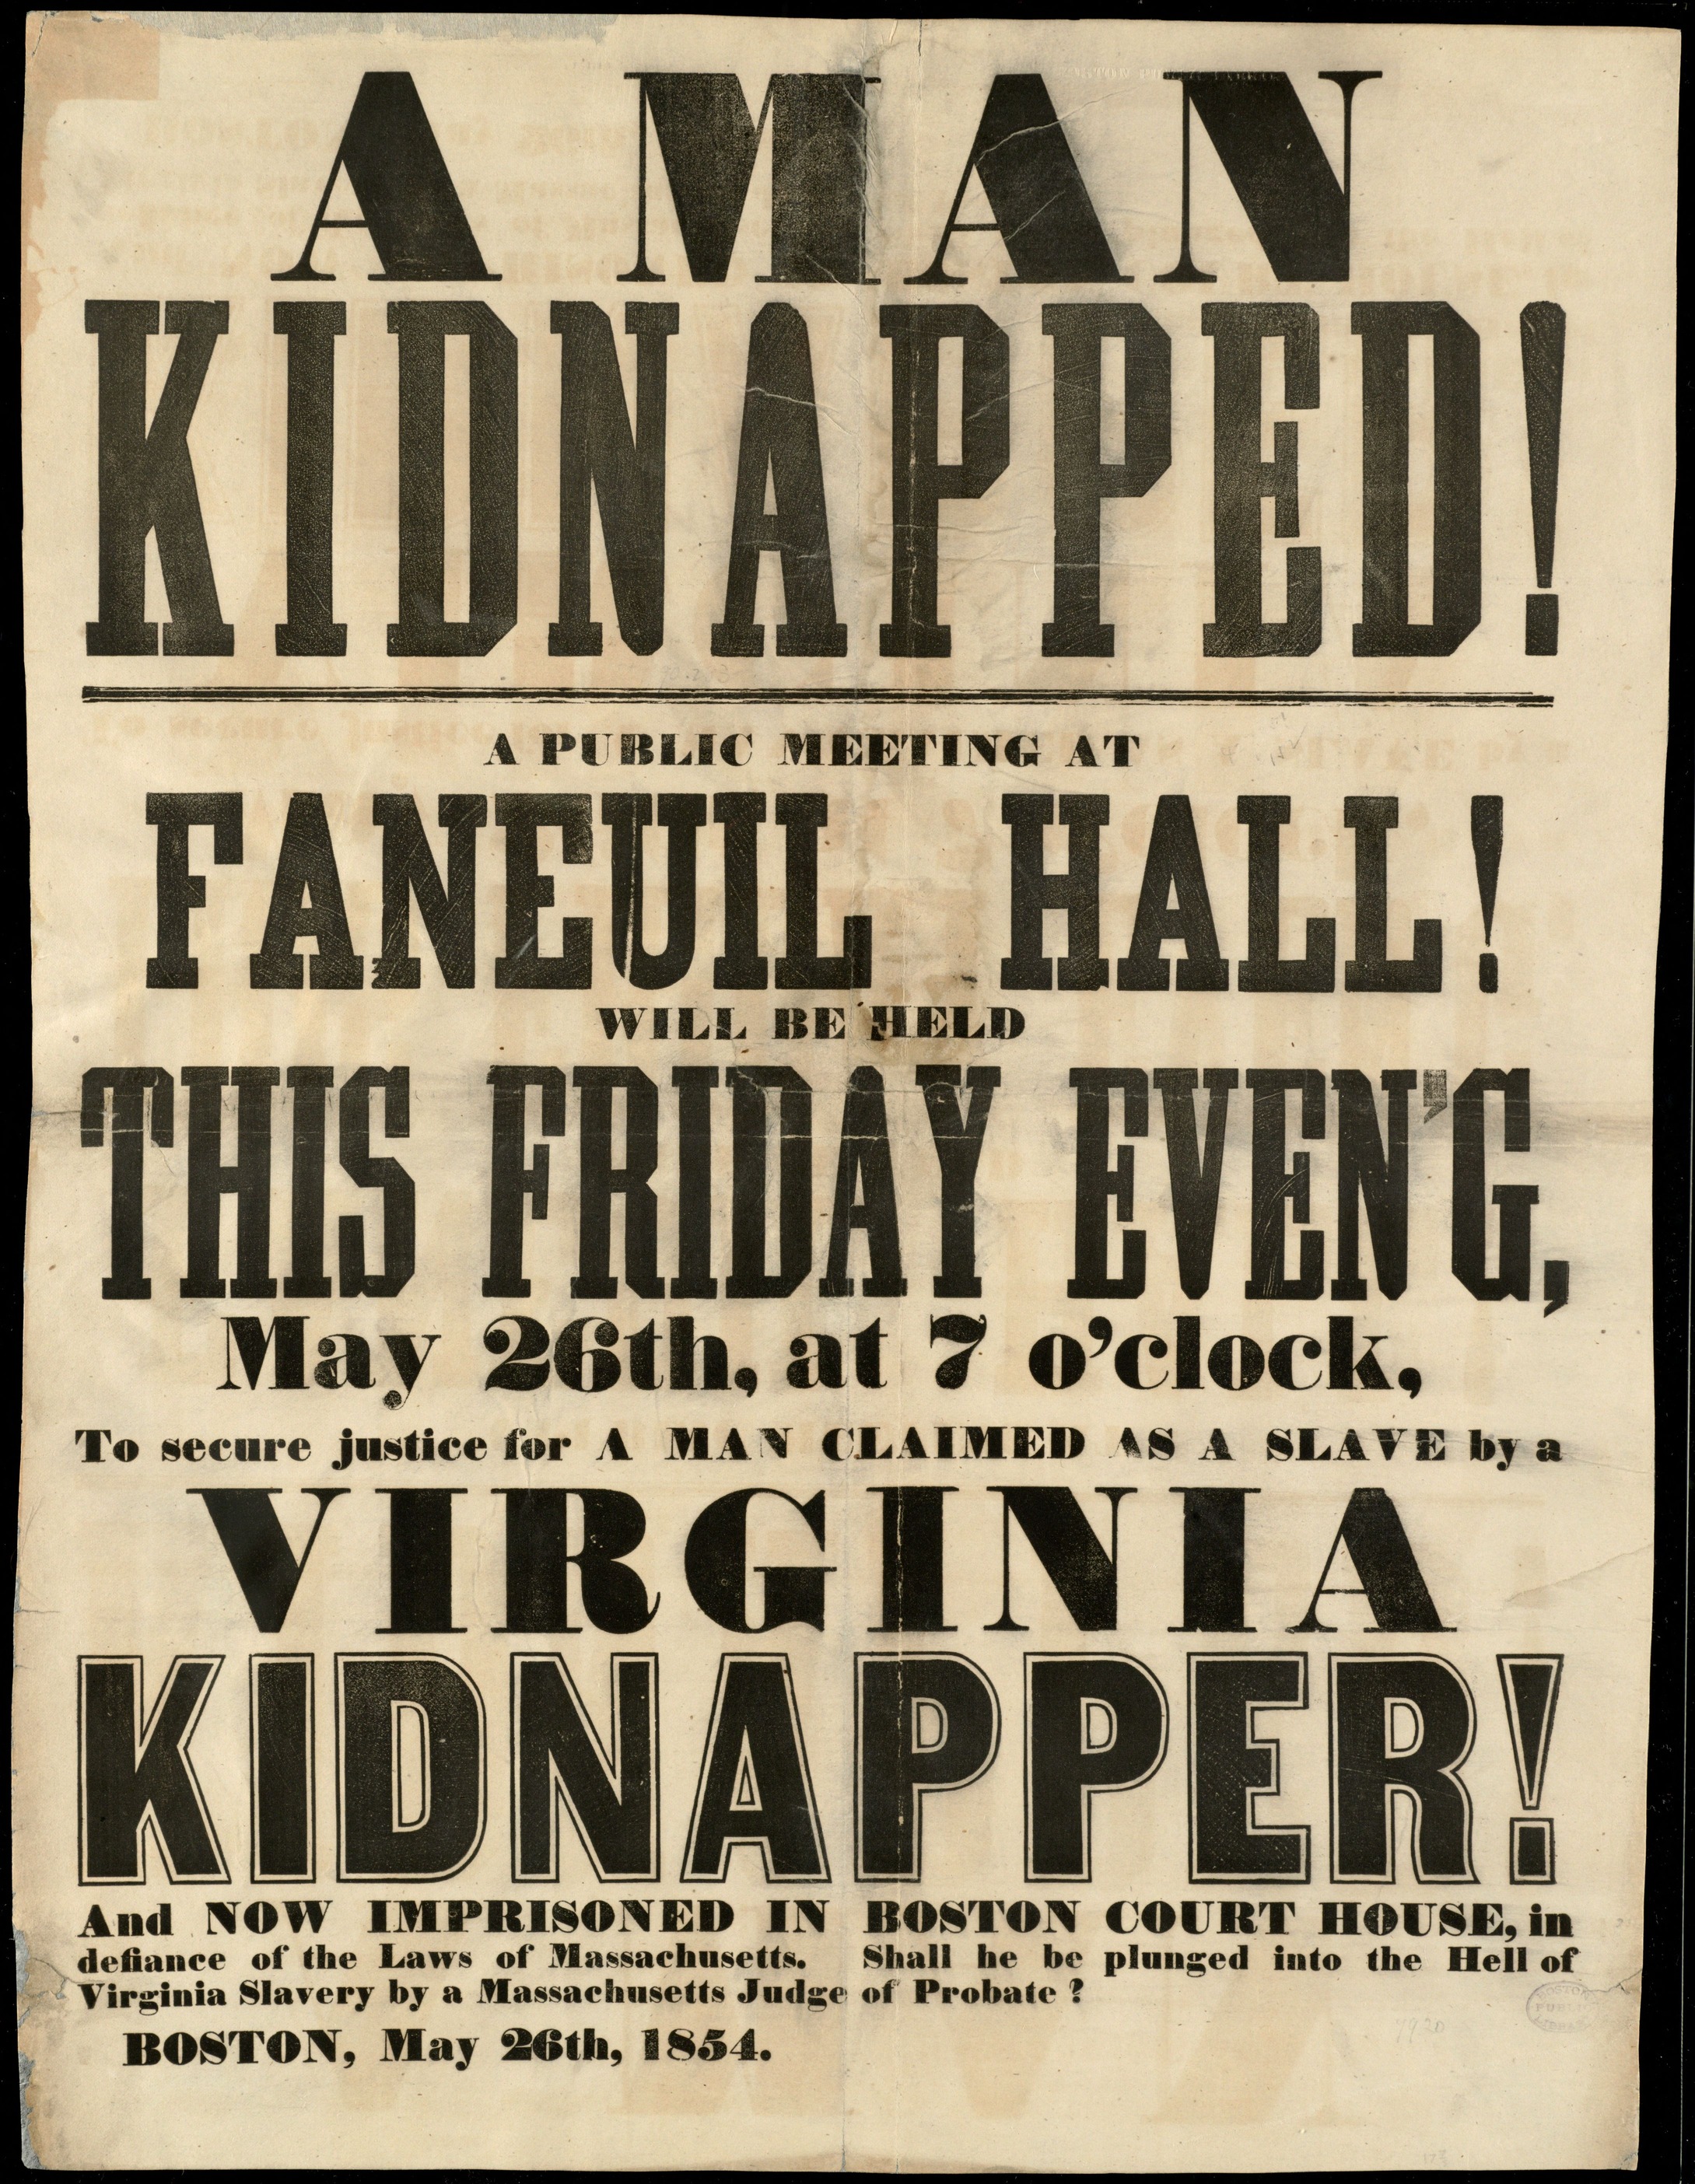 Poster that reads: "A Man Kidnapped! A public meeting at Faneuil Hall! Will be held this Friday even'g, May 26th, at 7 o'clock, To secure justice for A MAN CLAIMED AS A SLAVE by a Virginia Kidnapper! And now imprisoned in Boston Court House, in defiance of the Laws of Massachusetts. Shall he be plunged into the Hell of Virginia Slavery be a Massachusetts Judge of Probate? Boston, May 26th, 1854."